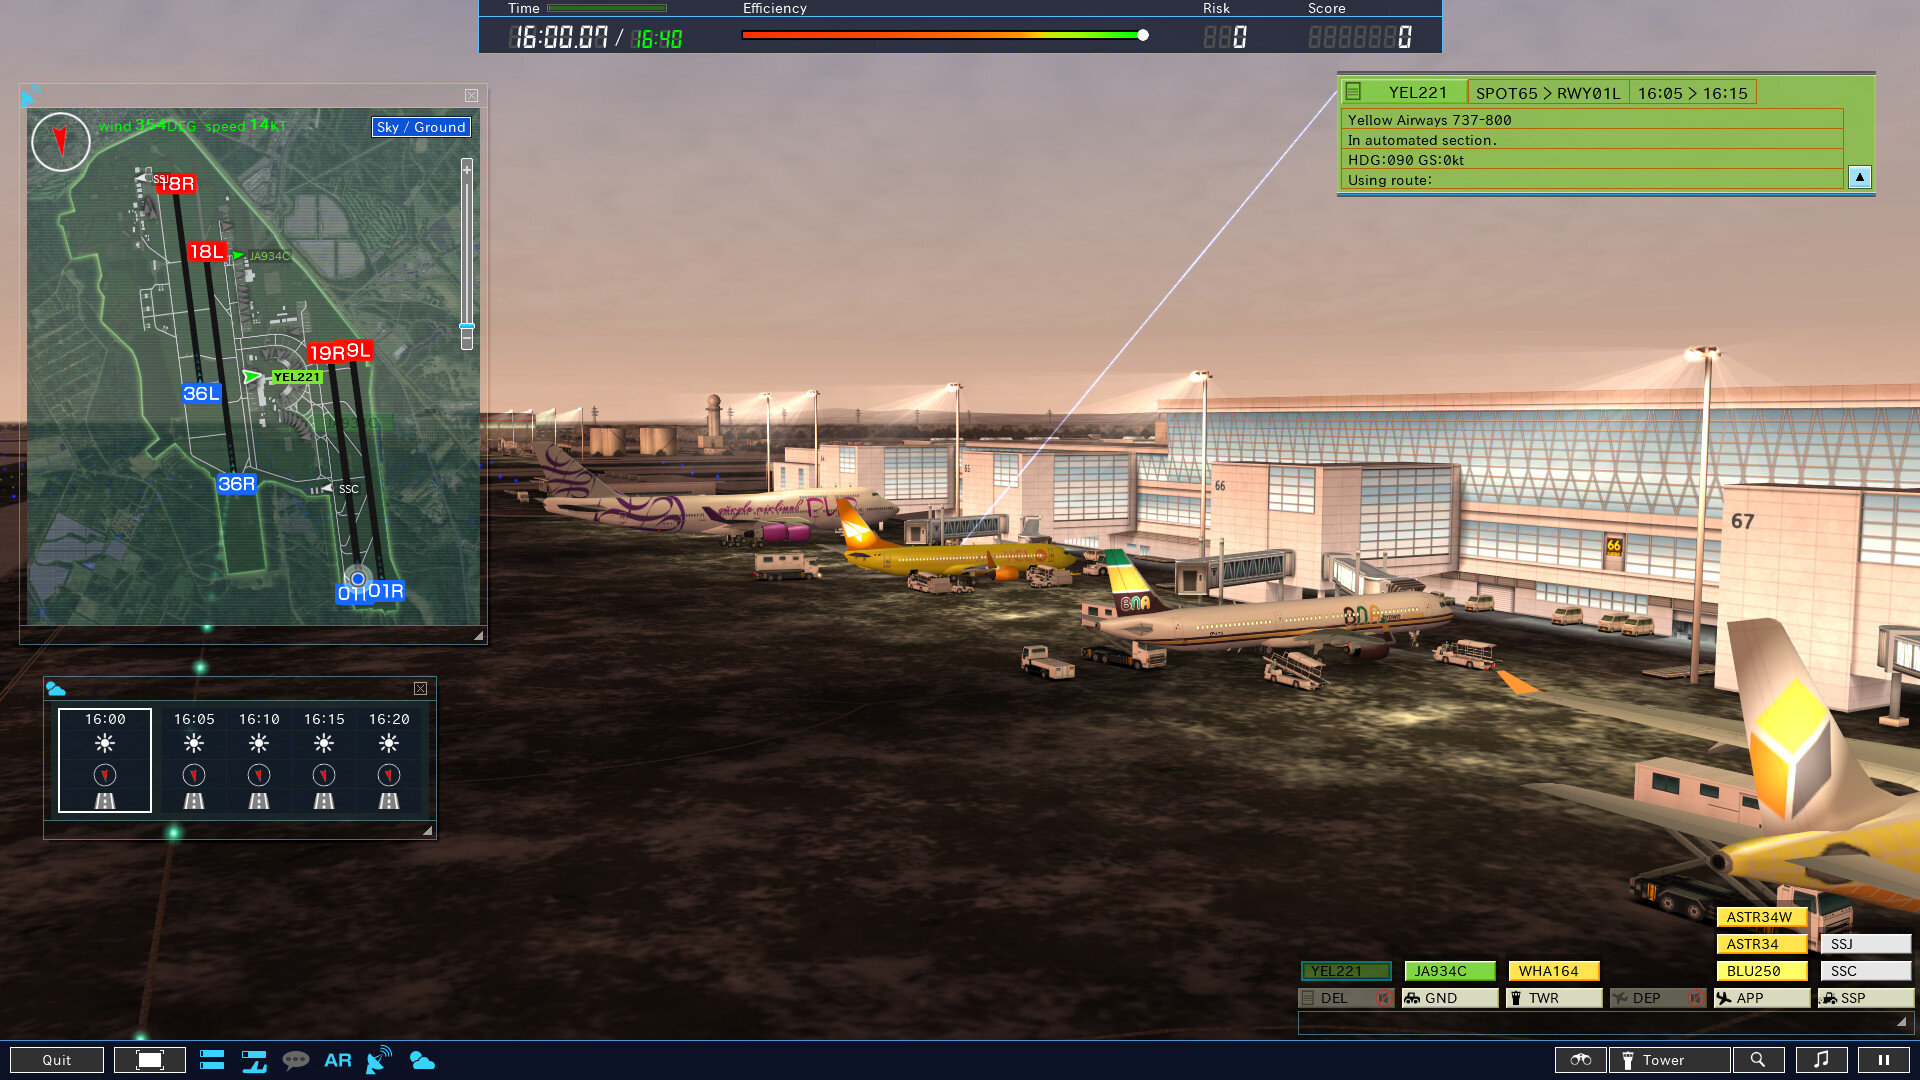 ATC4: Airport NEW CHITOSE [RJCC] on Steam